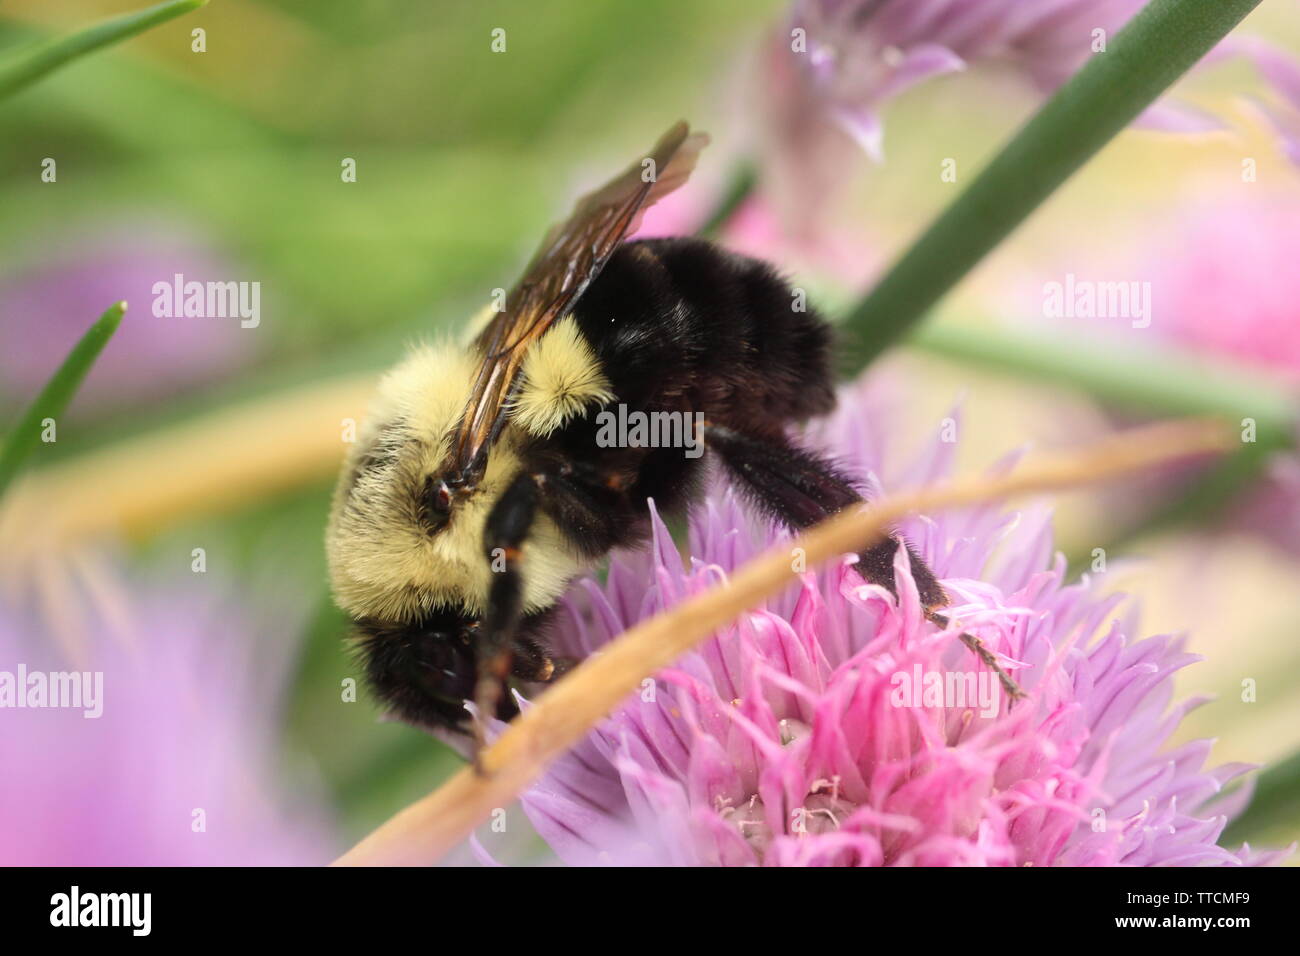 Macro photograph of a Common Eastern Bumble Bee foraging on the flowers of a chive plant. Stock Photo